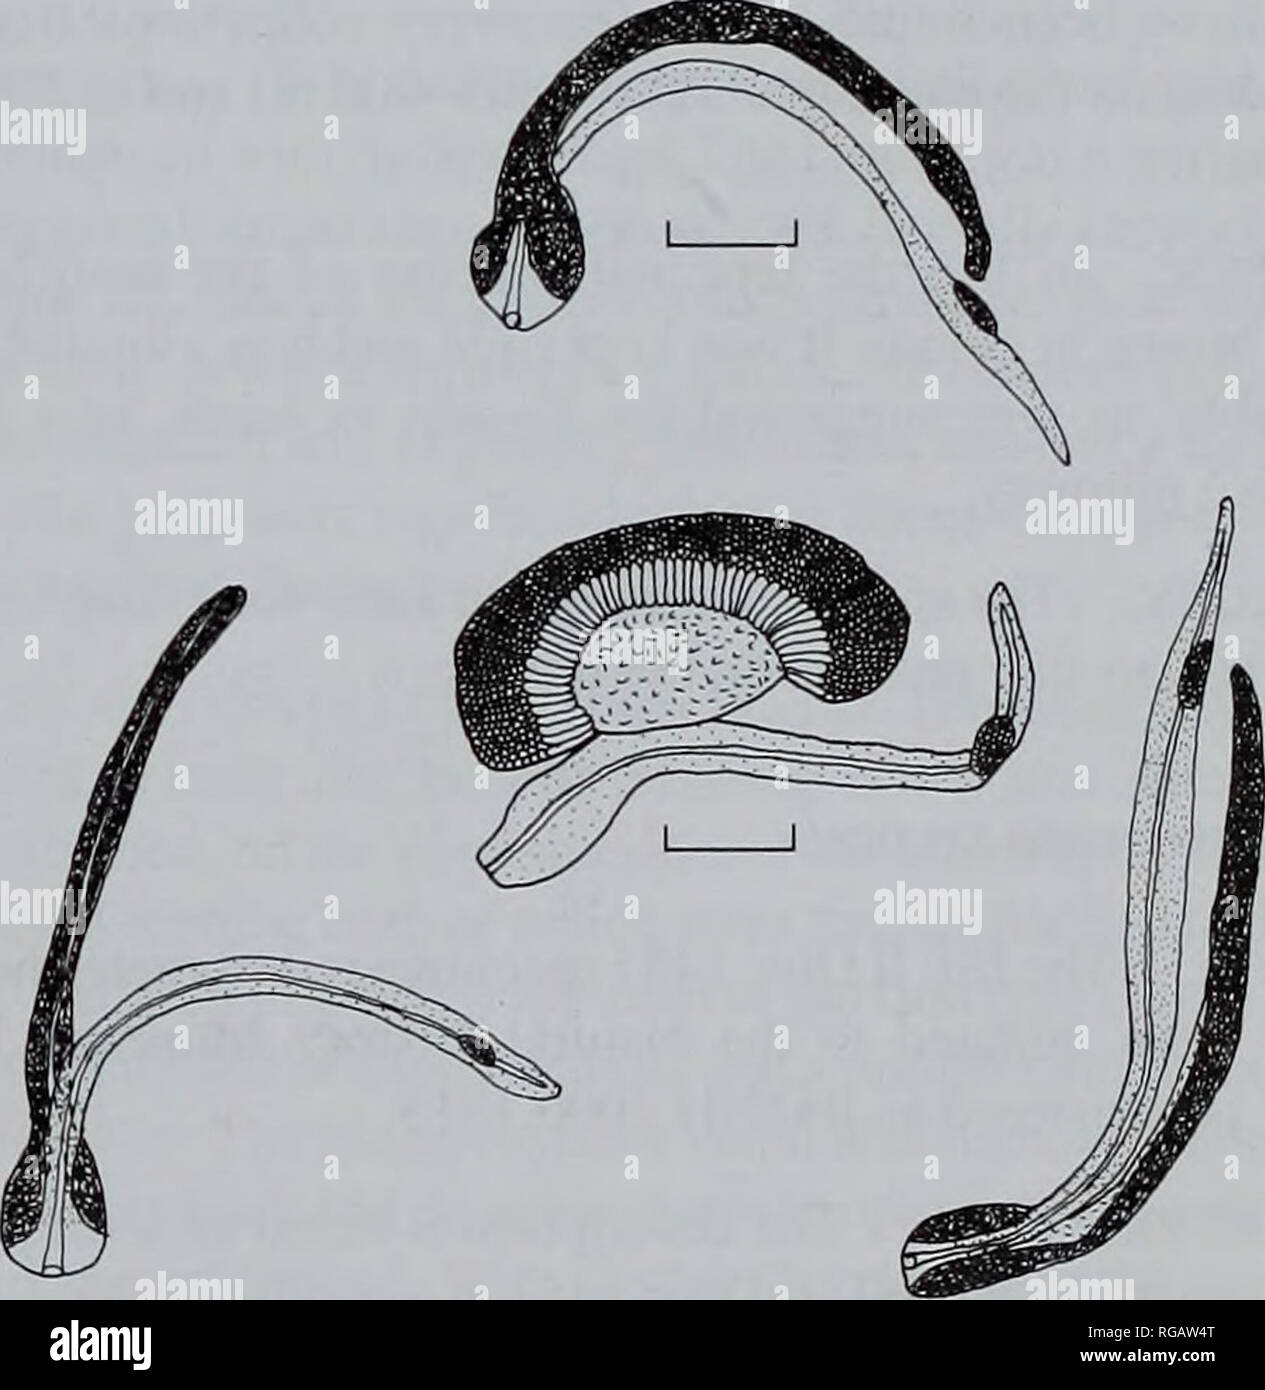 . Bulletin of the Natural History Museum (Zoology). Fig. 11 Erenna laciniata. A., B. gastrozooids; C. palpon. Scale 2 mm. D. male gonophores. Scale 1 mm.. Fig. 12 Erenna laciniata. Three mature tentilla (Scale 1 mm), with (centrally) an immature one (Scale 0.5 mm). Palpon. (Fig. 11C). Numerous palpons, up to c. 15 mm long, were present with the specimens. They were featureless thin-walled sacs filled, with a milky-white amorphous substance, although in life they were suffused with a brownish hue. The extent of the proboscis was variable, but typically, at its base, there were some. Please note Stock Photo